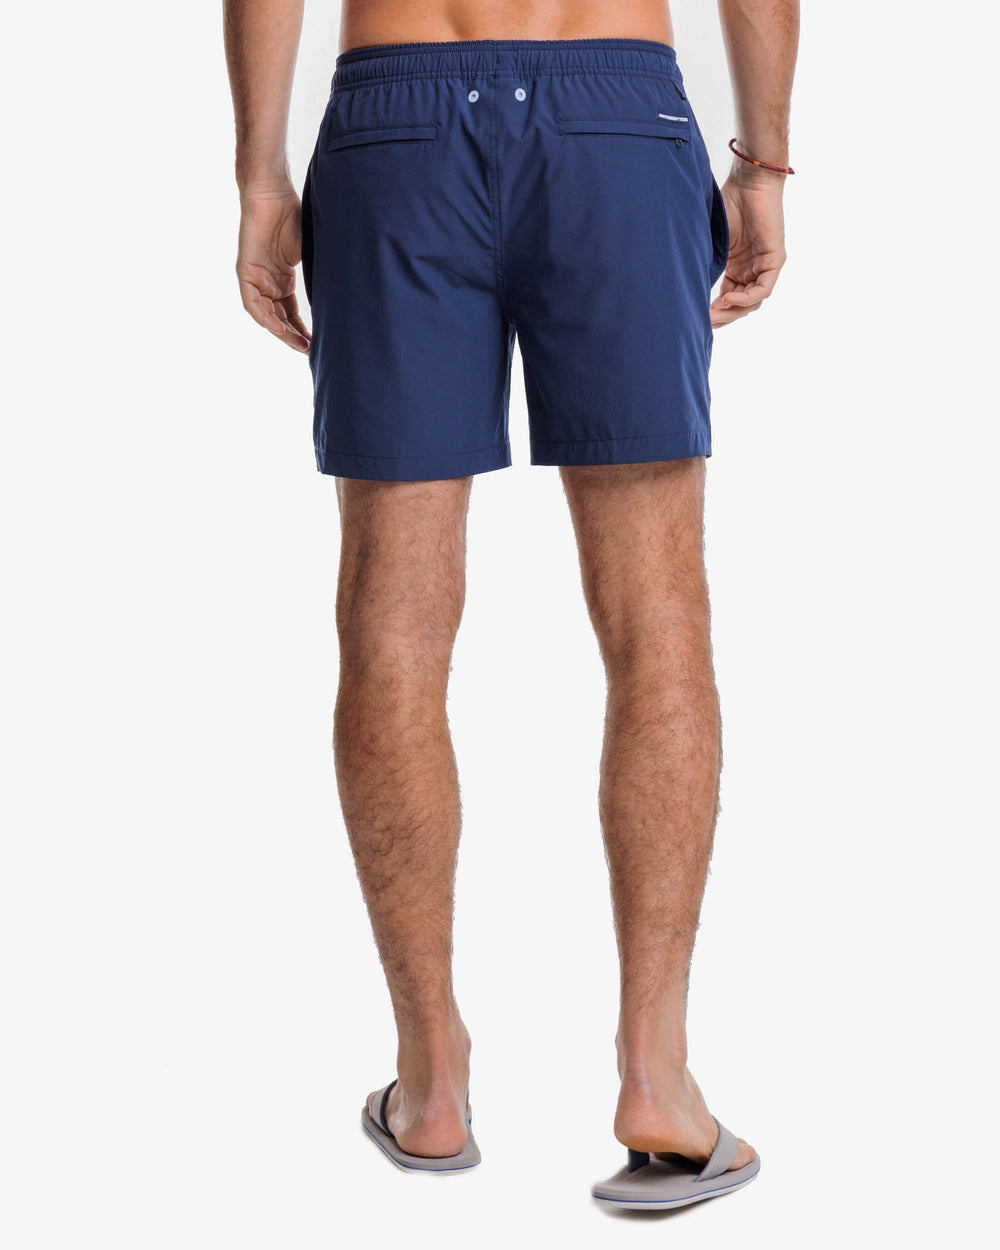 The back view of the Southern Tide Solid Swim Trunk 3 by Southern Tide - True Navy